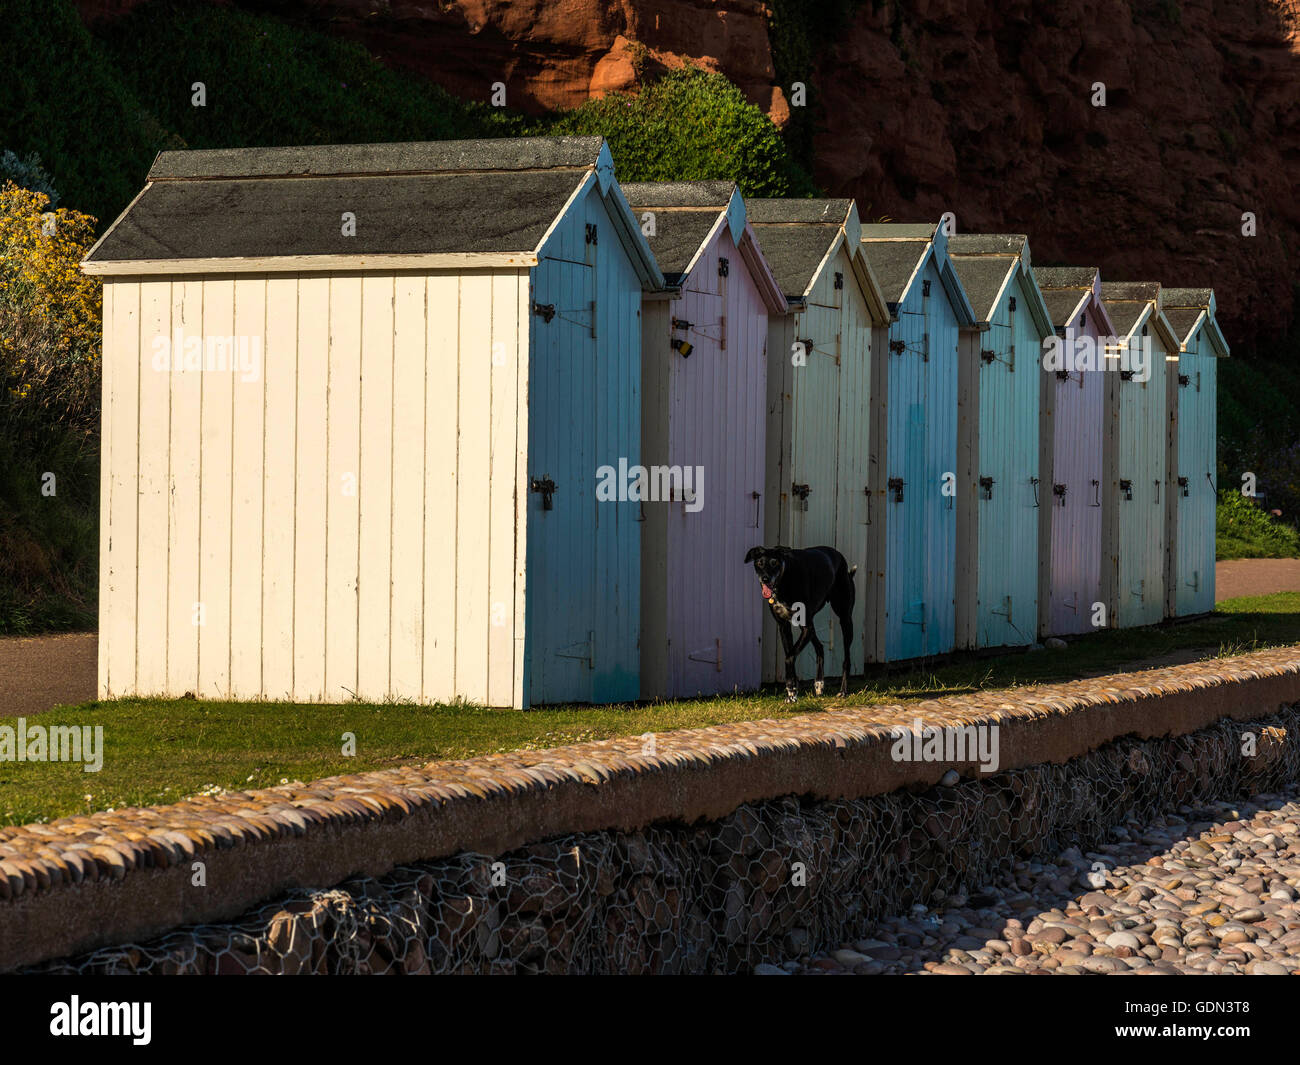 Seaside scene depicting a row of multicolored beach huts with black dog trotting past, pebbled beach and Jurassic coast. Stock Photo